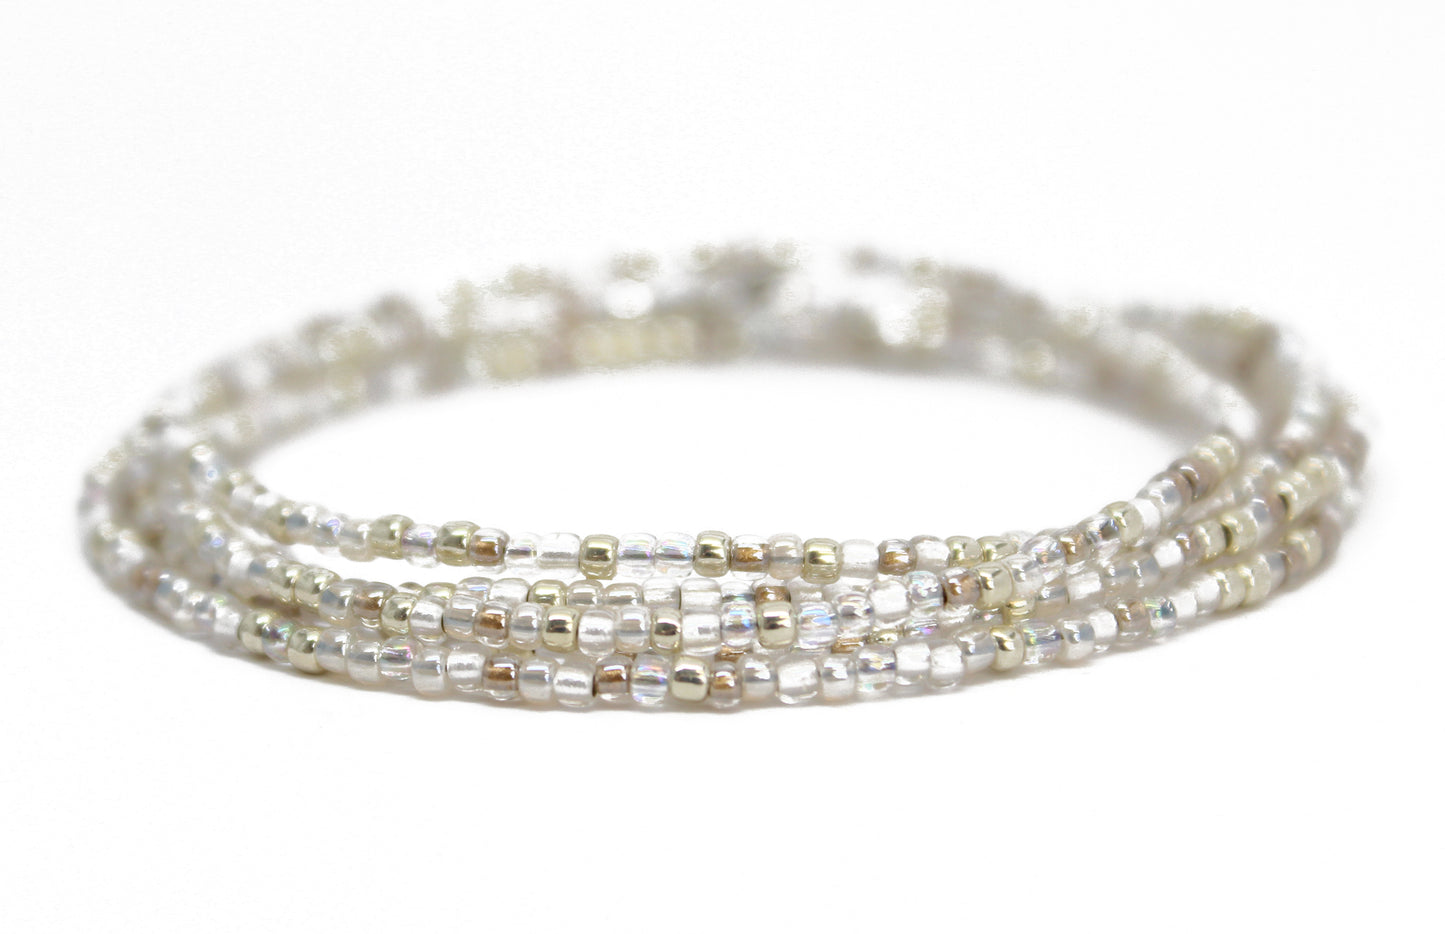 Gold and Silver Seed Bead Necklace, Thin 1.5mm Single Strand